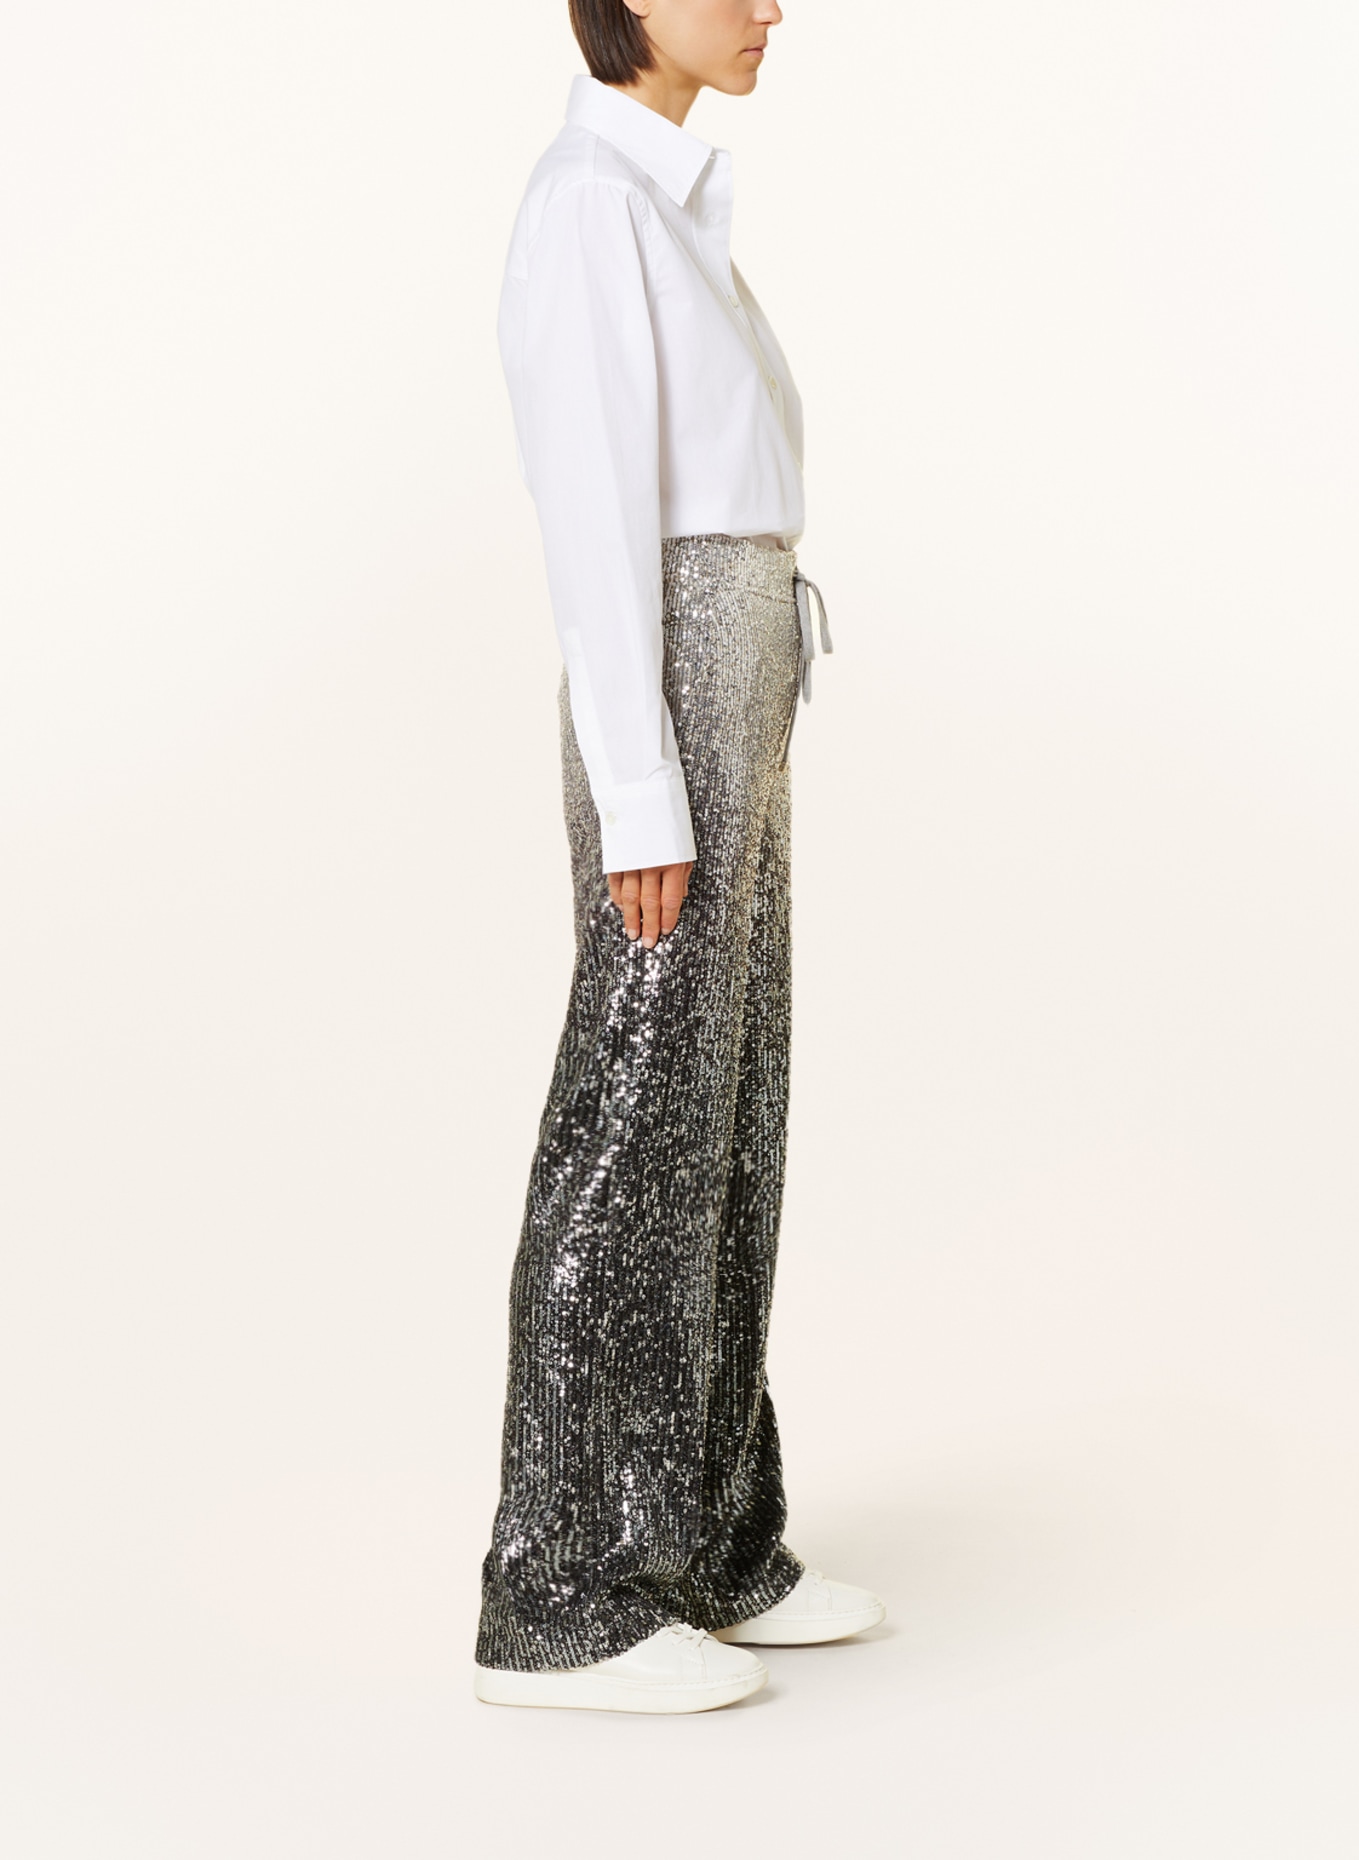 CAMBIO Trousers AVRIL with sequins, Color: GRAY/ BLACK/ SILVER (Image 4)